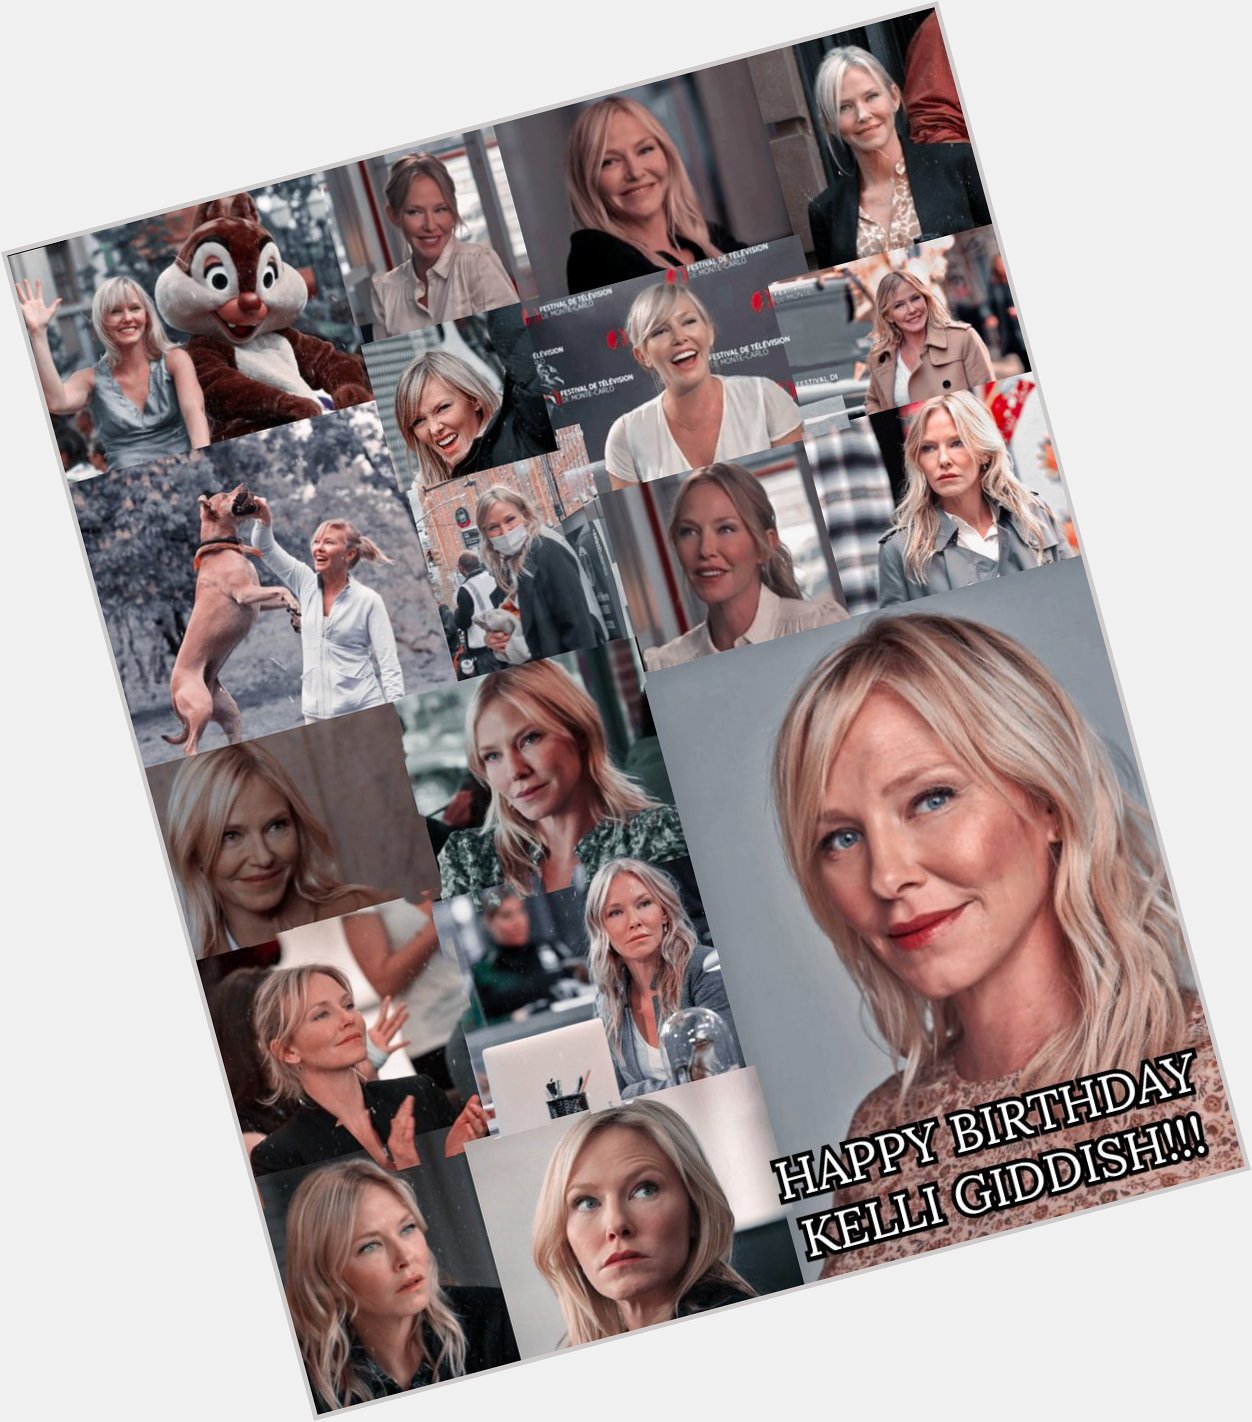 HAPPY BIRTHDAY KELLI GIDDISH!!! 
You are so awesome !!!  